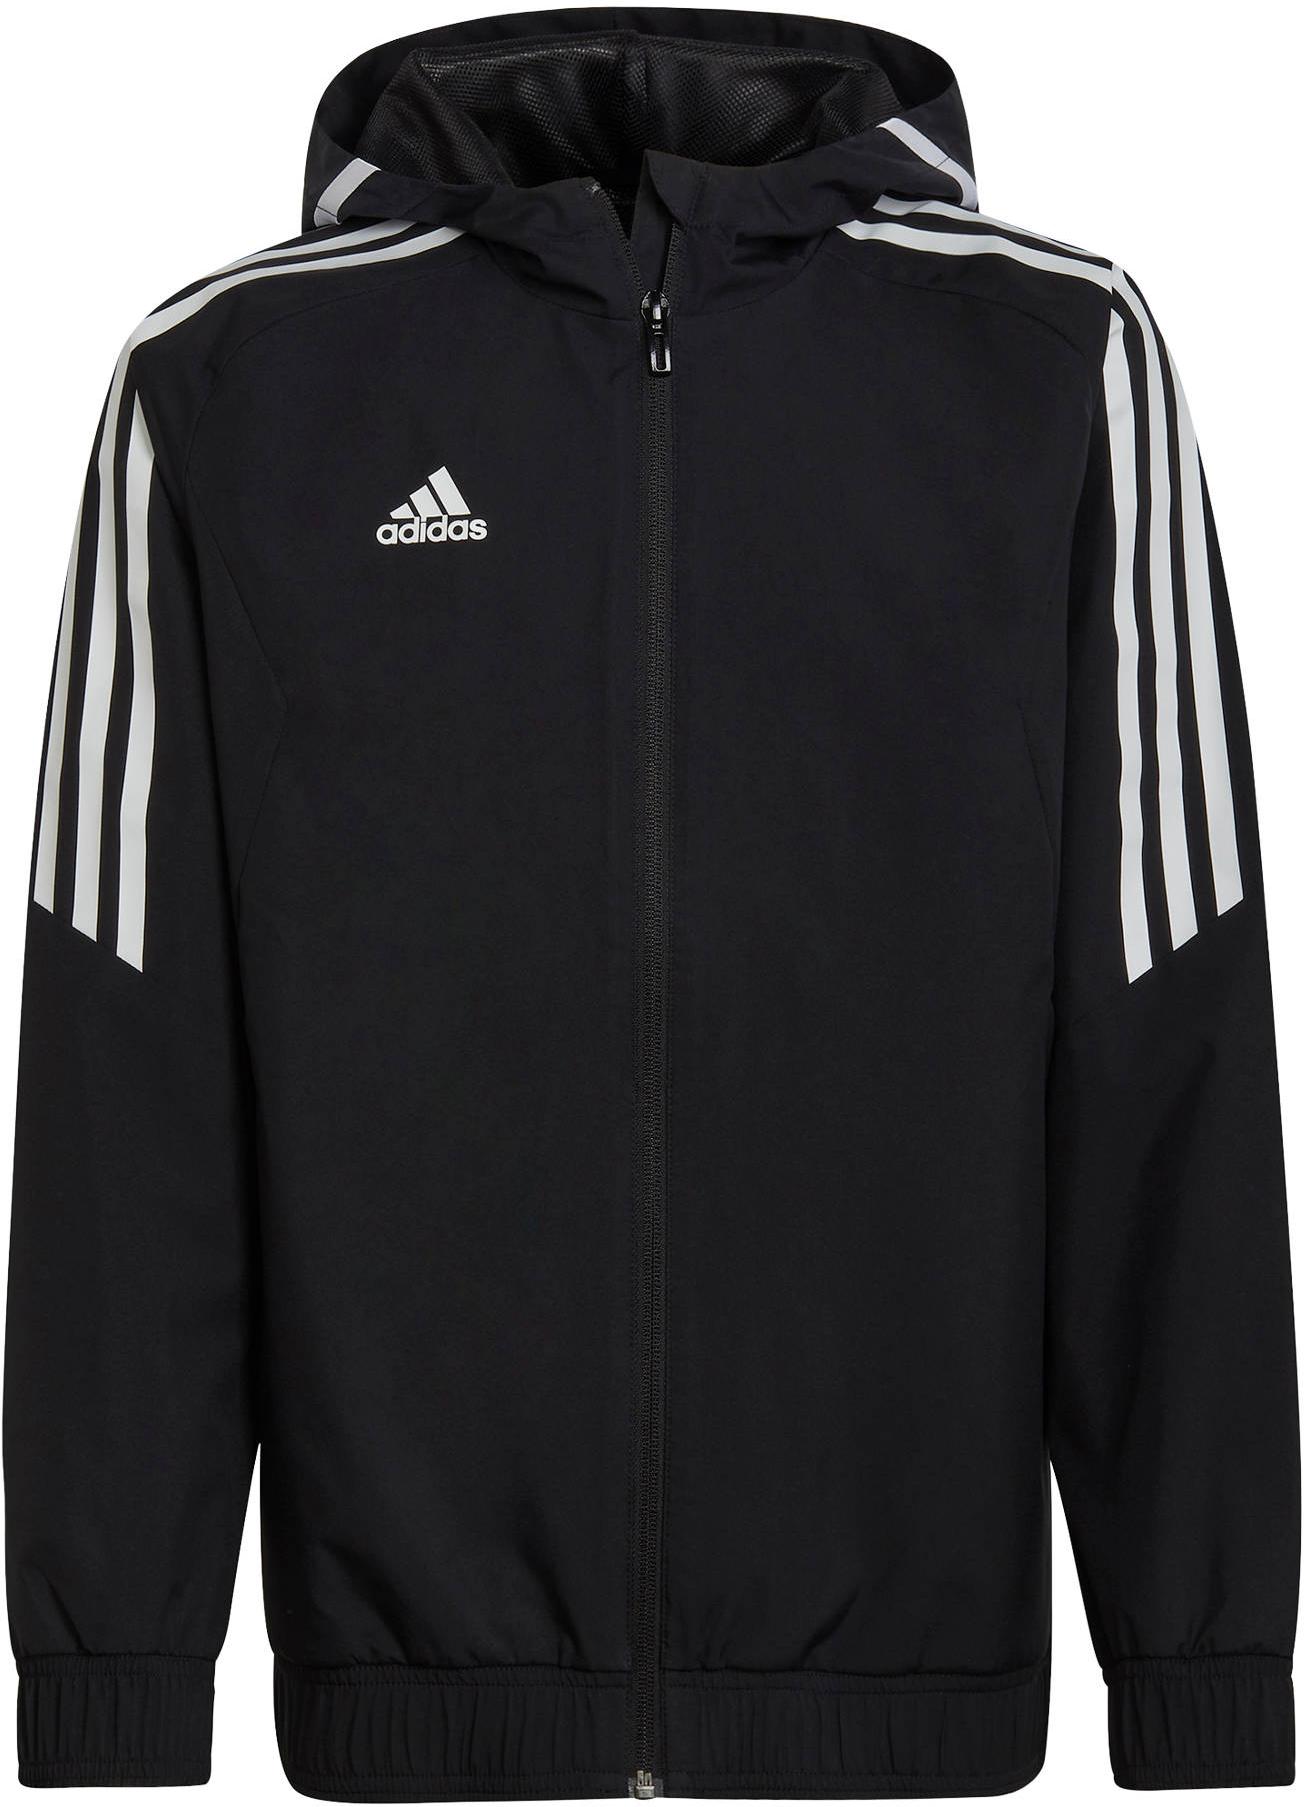 Hooded jacket adidas CON22 AW JKT Y